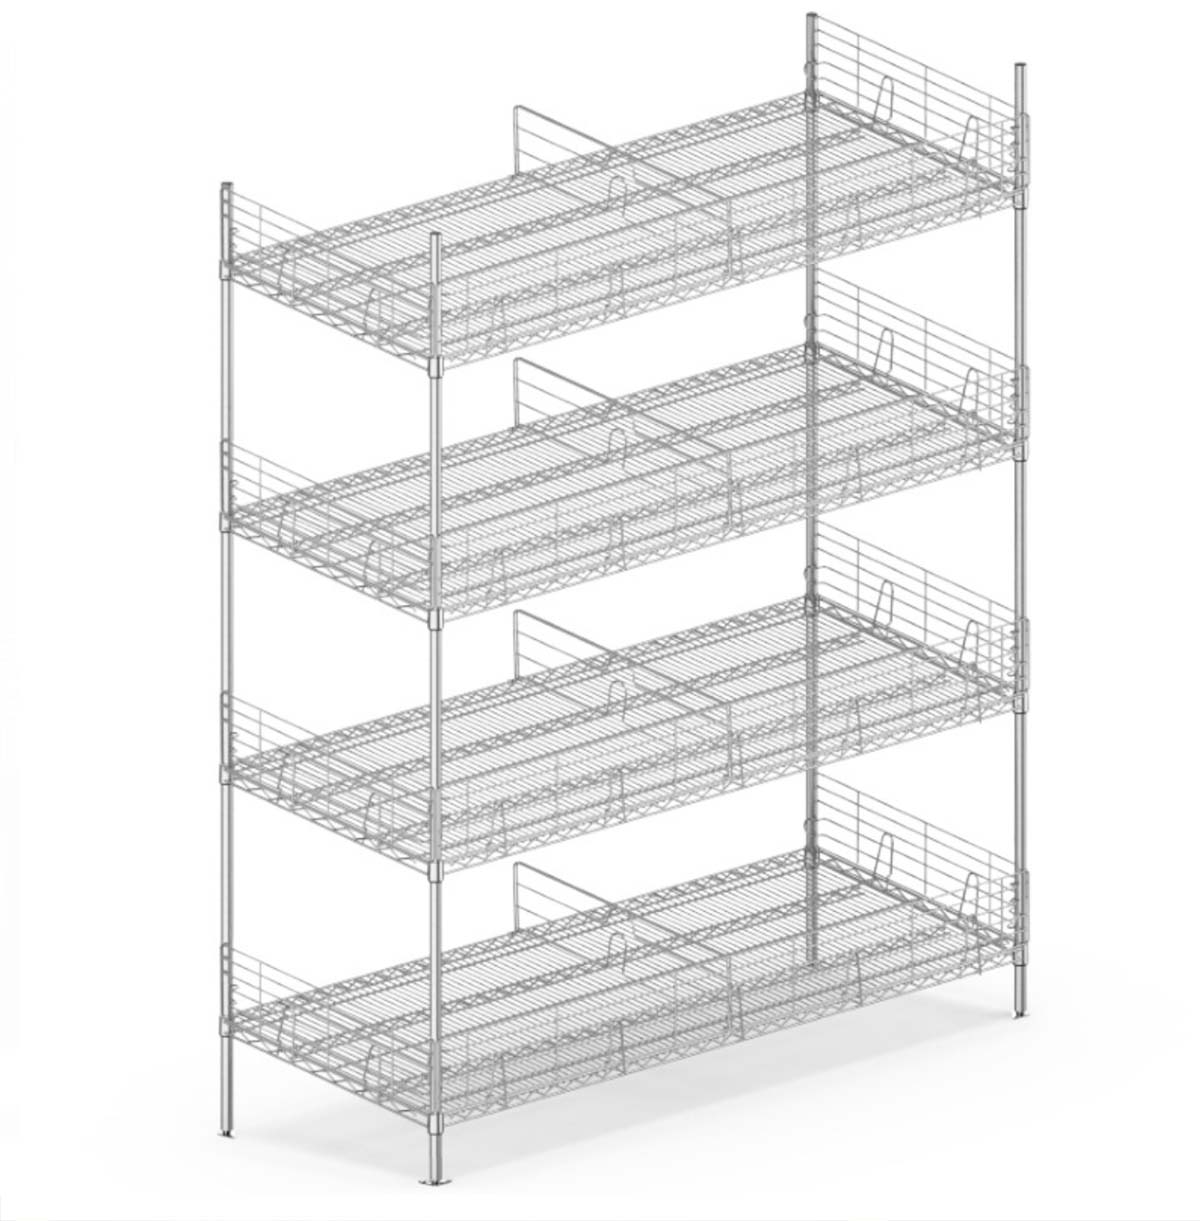 4-Tier Slanted Wire Shelving for Industrial / Wire Basket Shelving / Heavy Duty Wire Shelving Unit